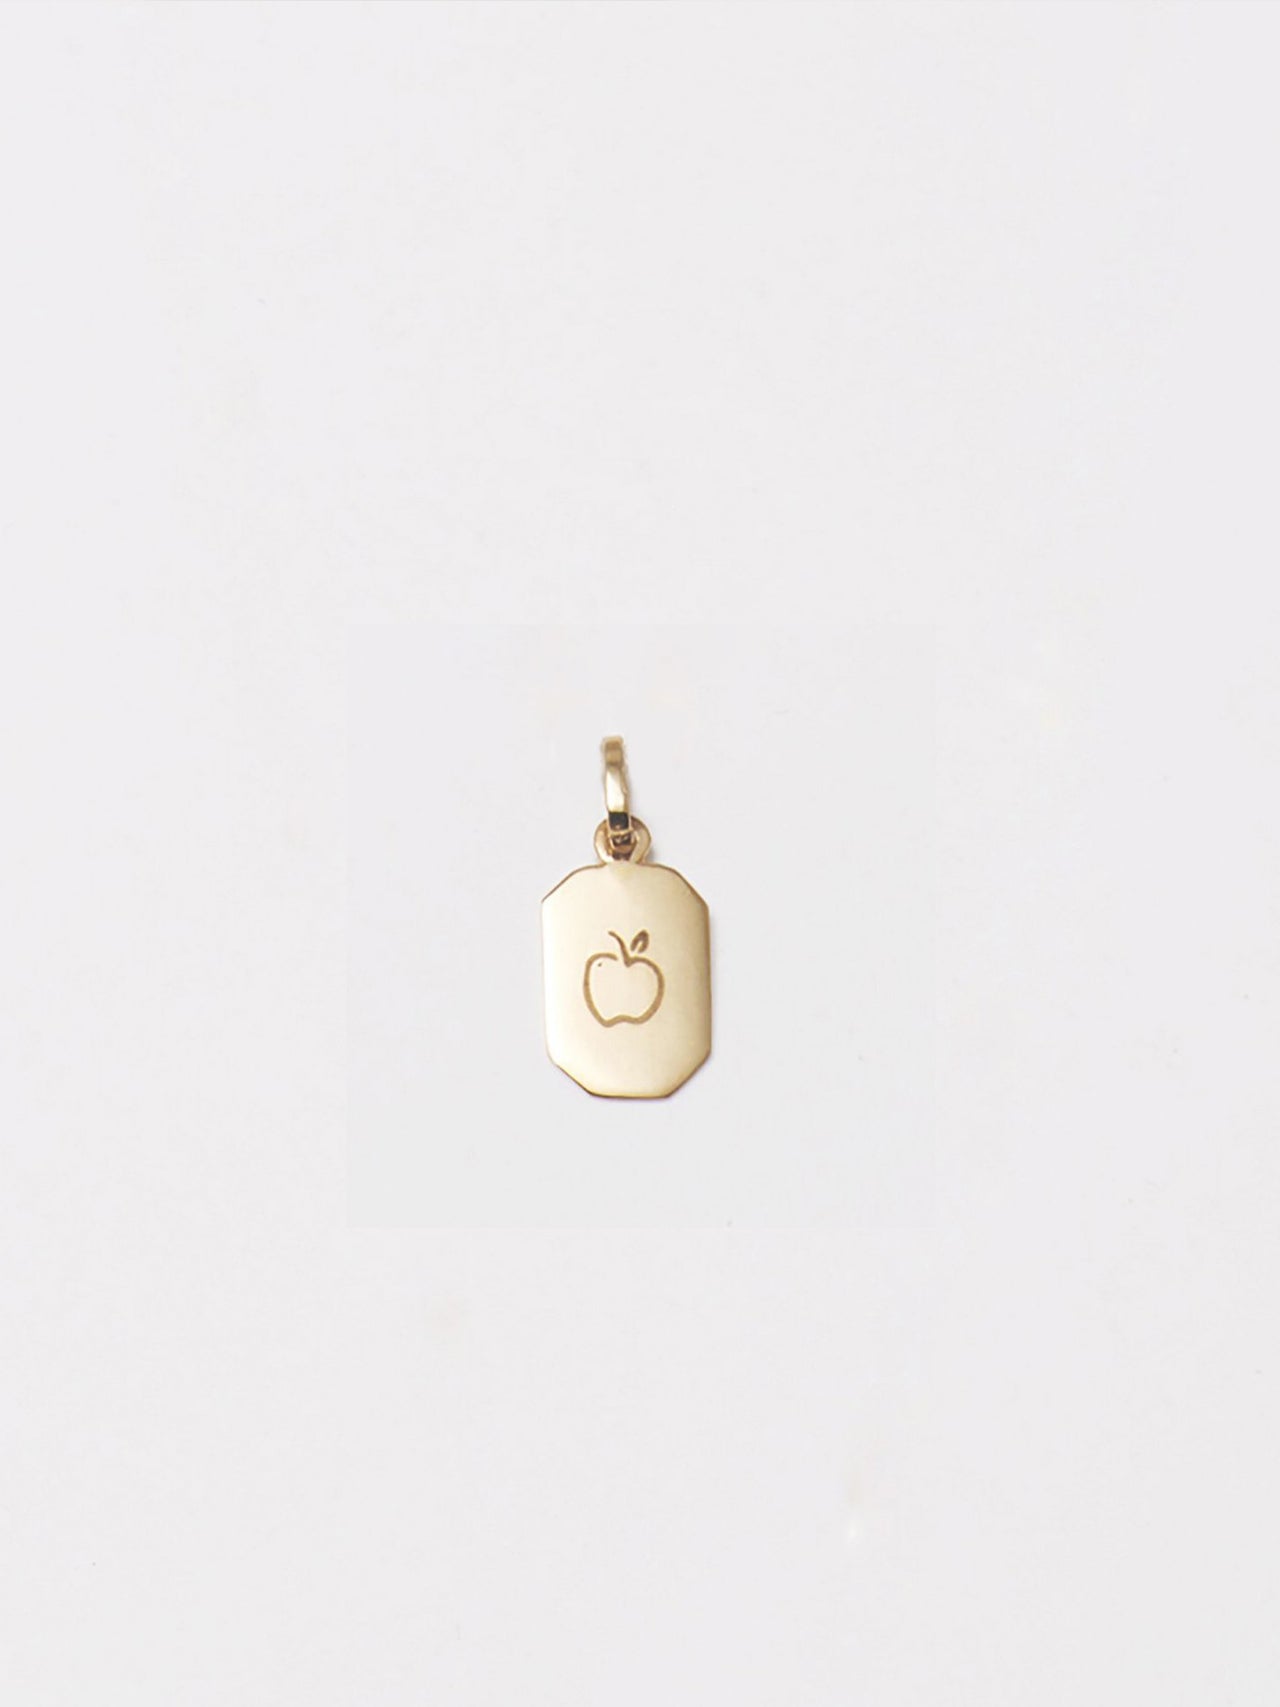 10kt yellow gold octagonal ID pendant with engraving of an Apple